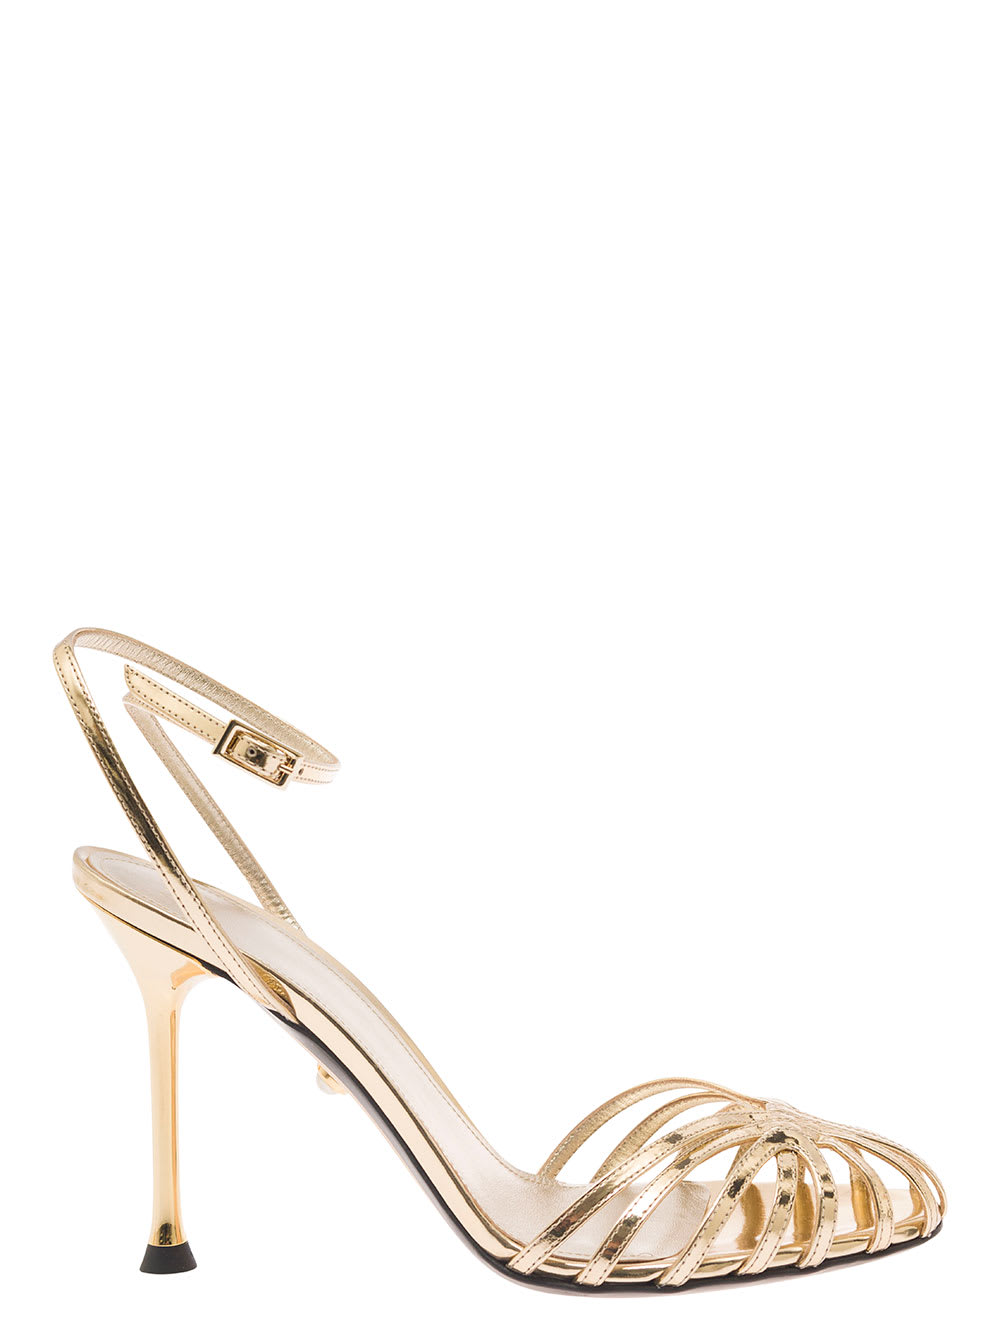 Alevì ally Golden Sandals With Stiletto Heel In Metallic Leather Woman